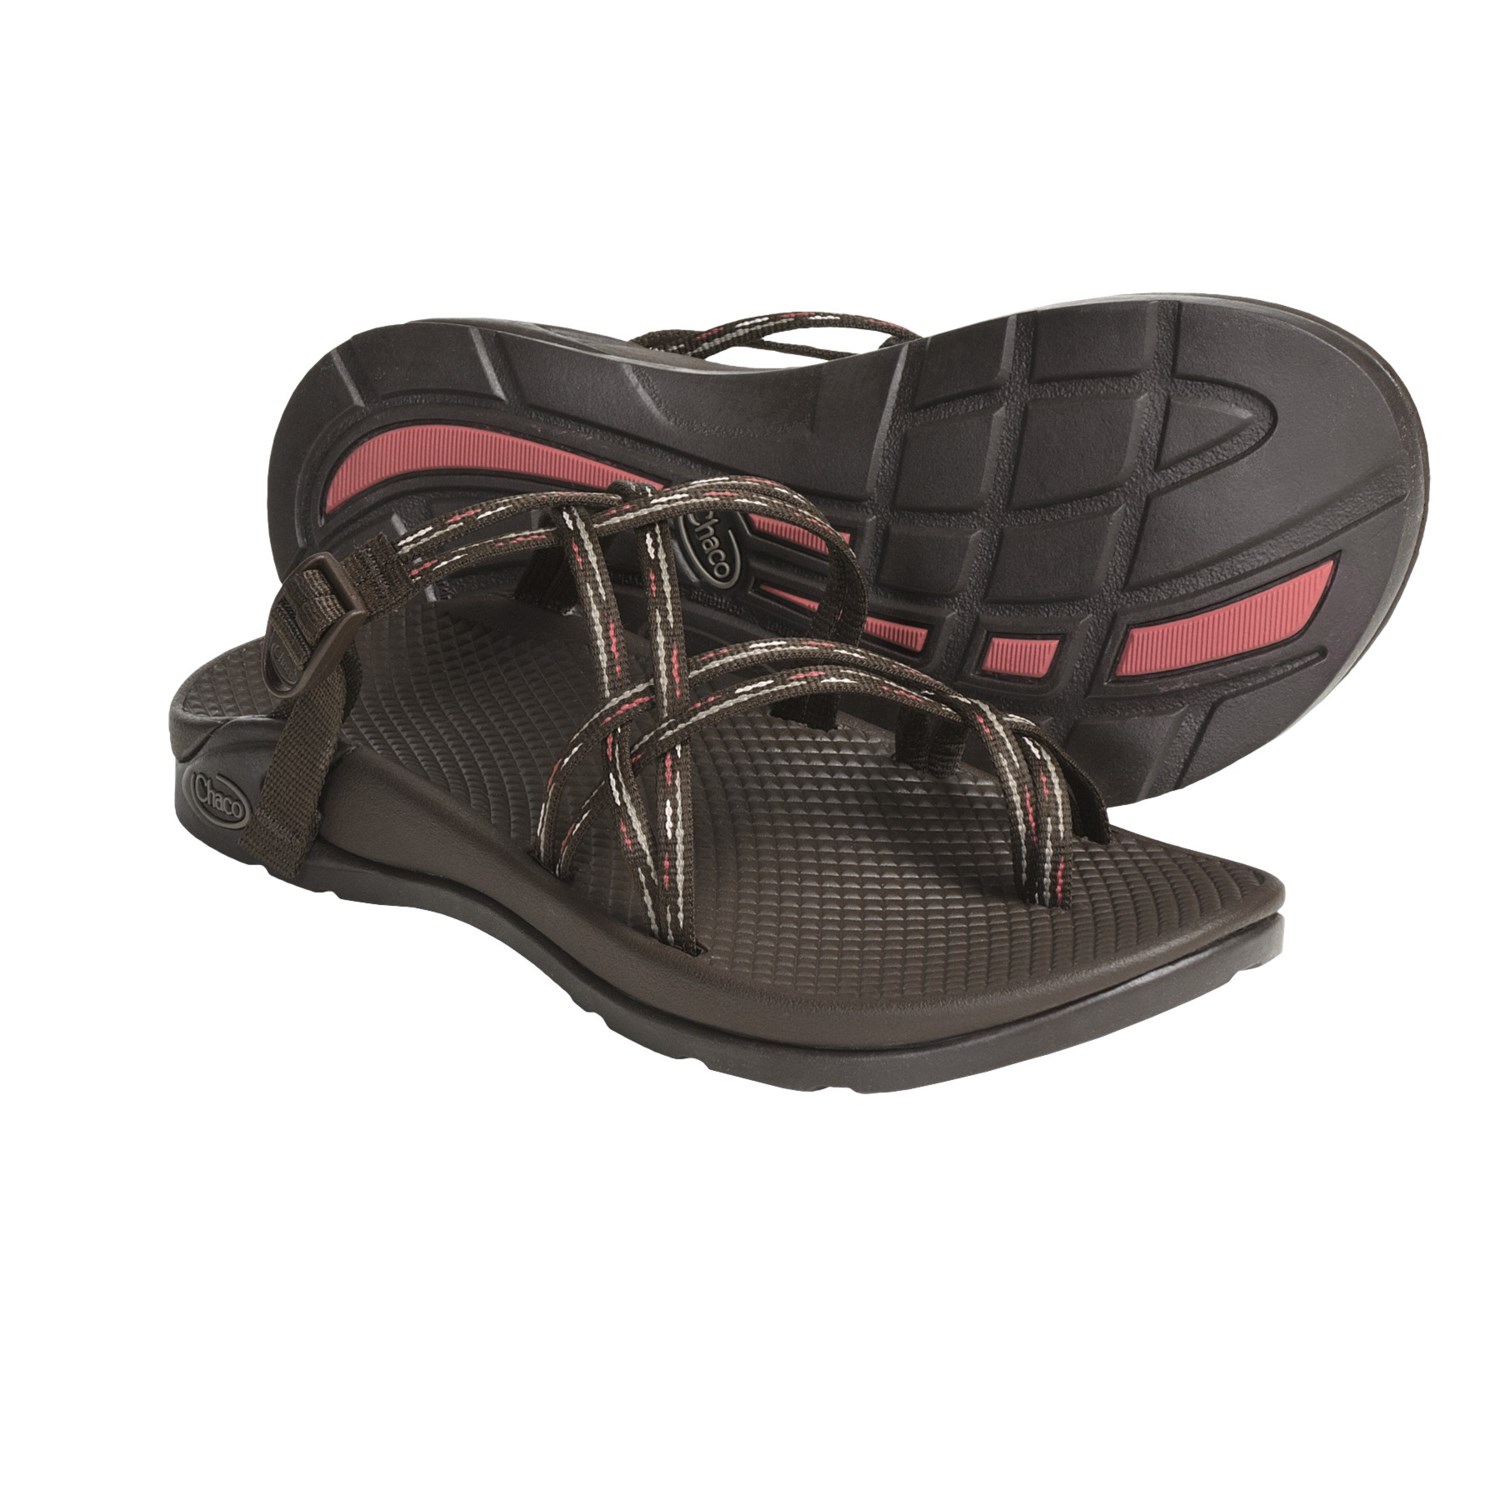 Details about Chaco Zong X Sport Sandals For Women 6 7 8 9